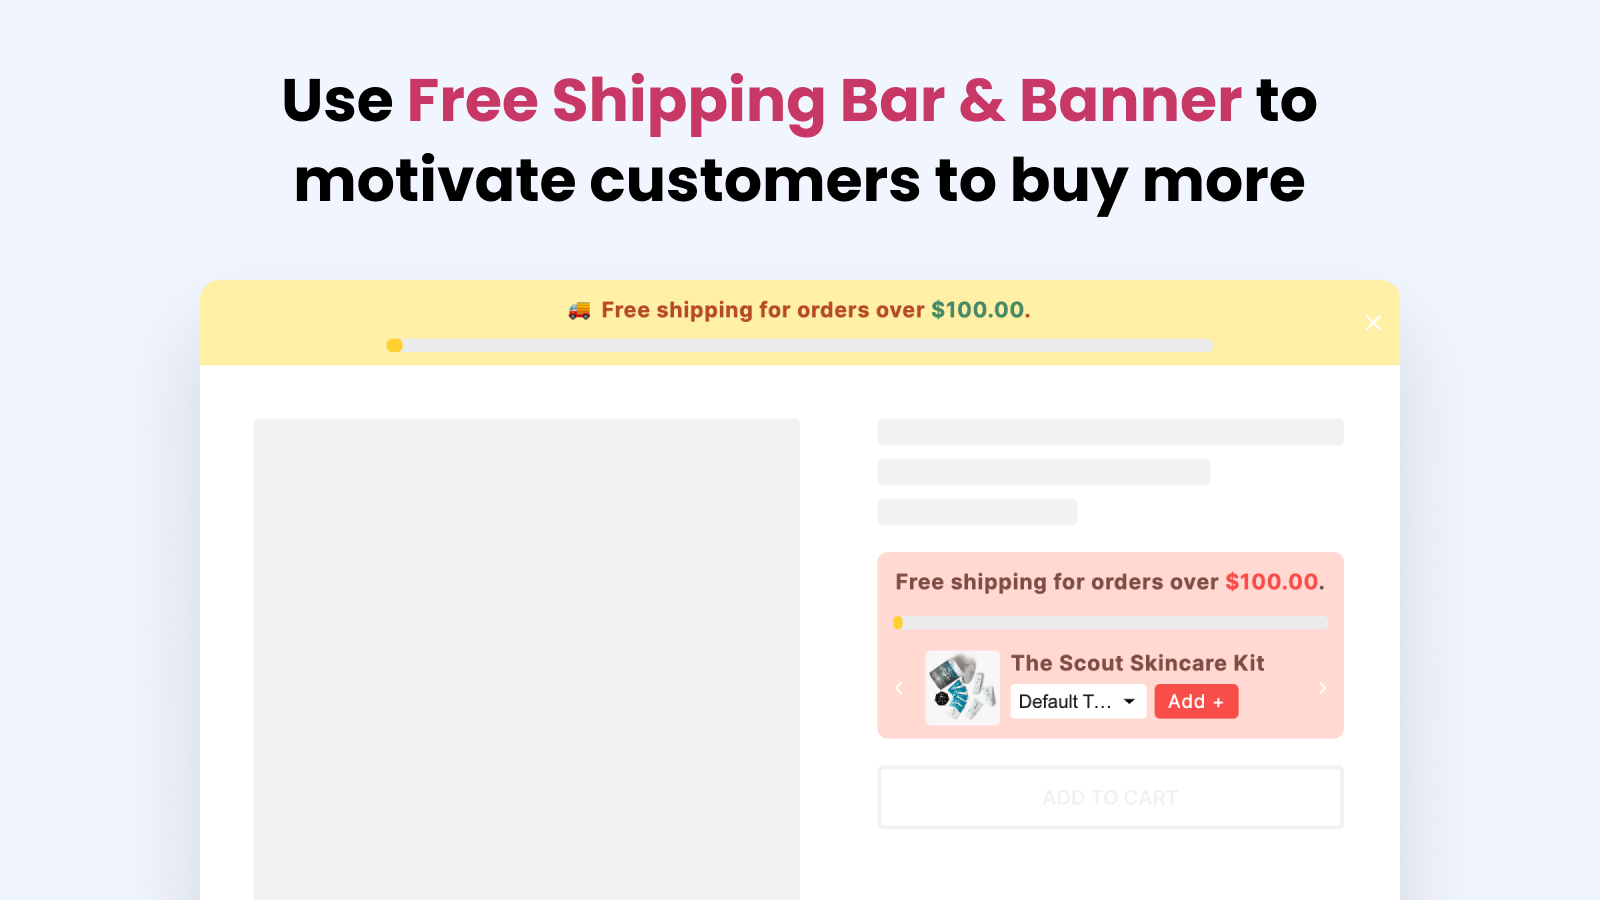 Use Free Shipping Bar & Banner to motivate customers to buy more